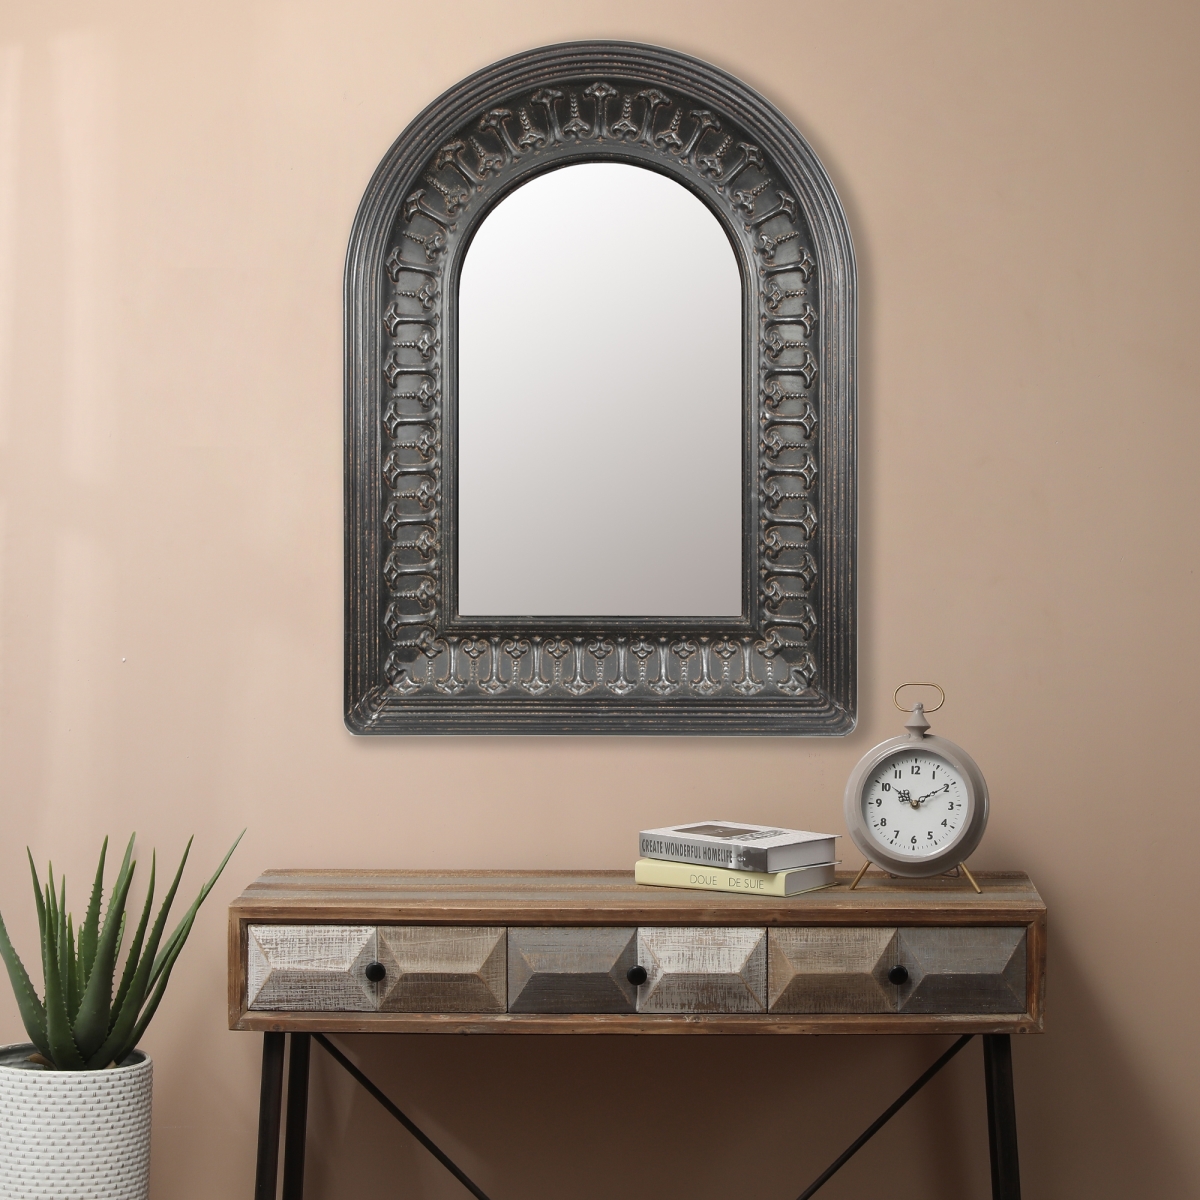 Wha812 Metal Arched Scroll Wall Mirror